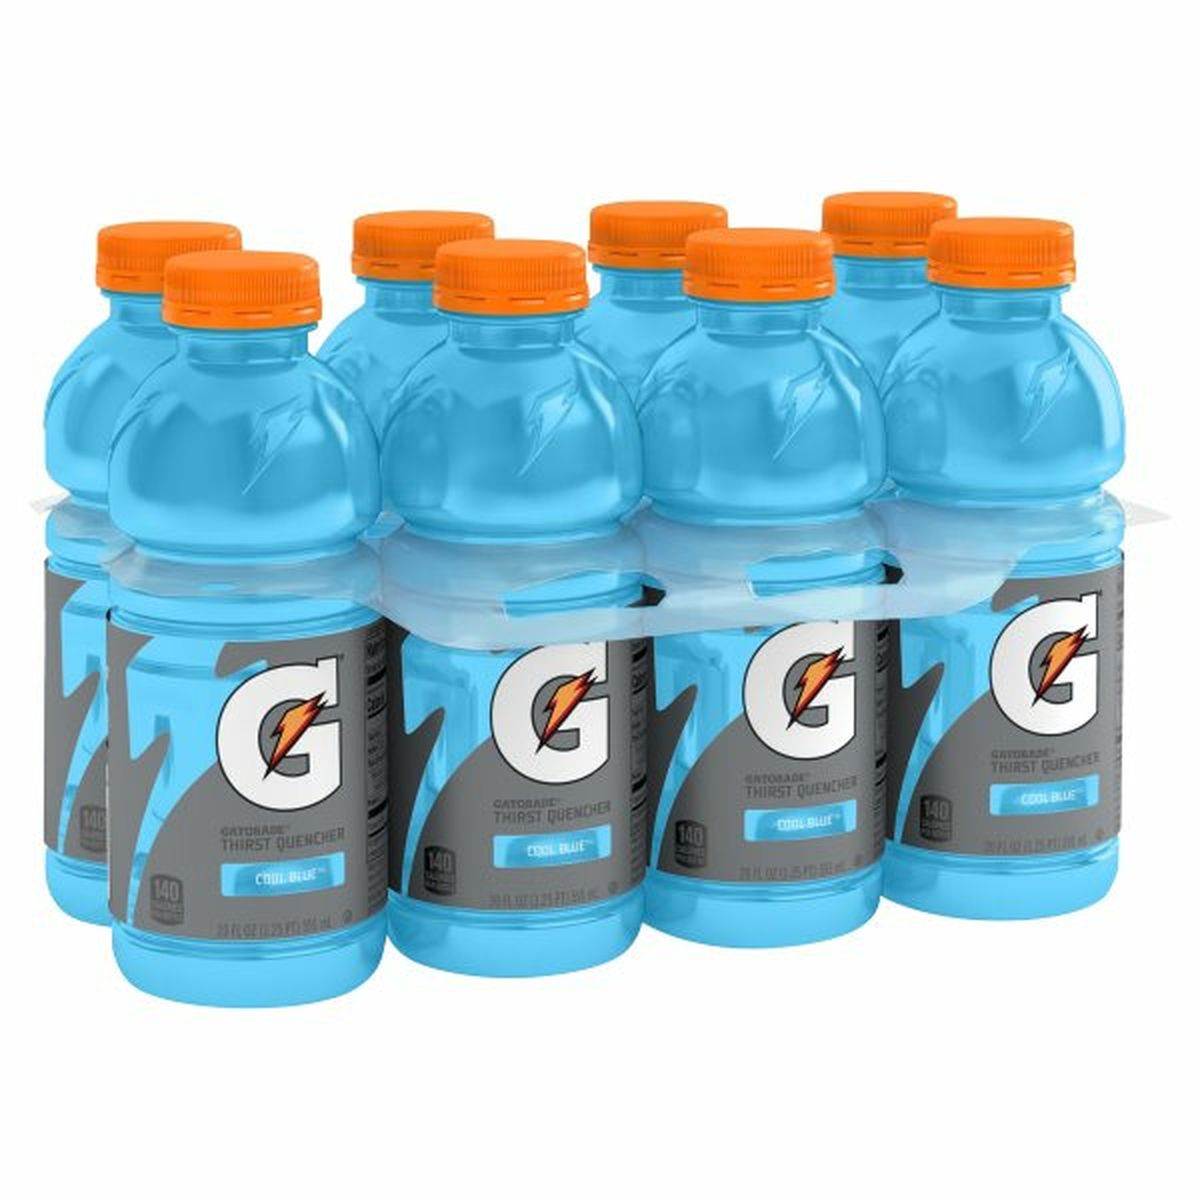 Calories in Gatorade Thirst Quencher, Cool Blue Flavored